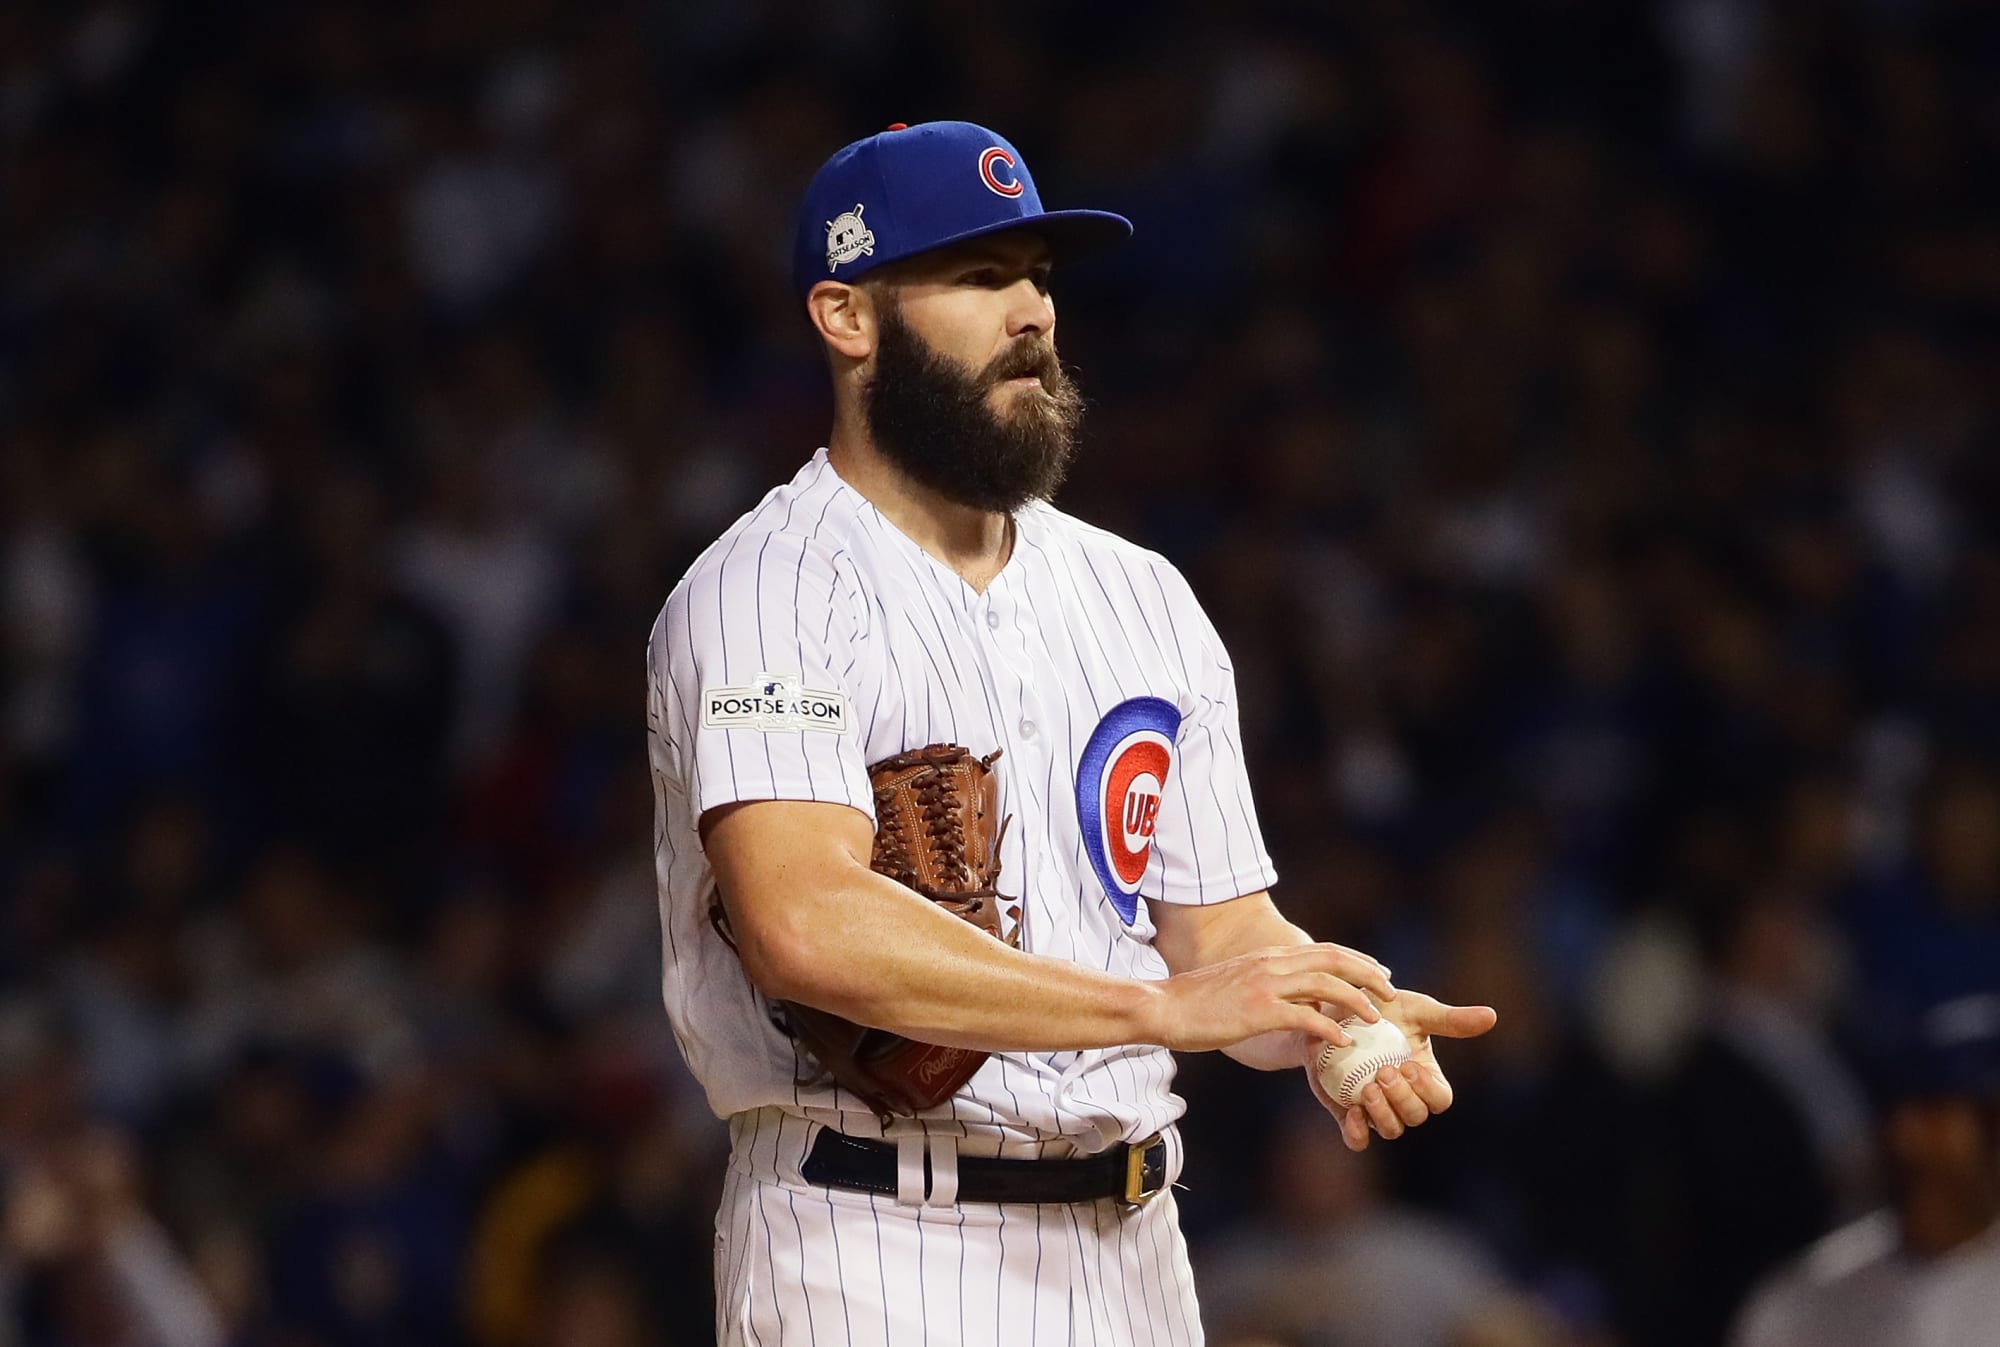 Jake Arrieta sounds off on Cubs future, PED rumblings: 'Some